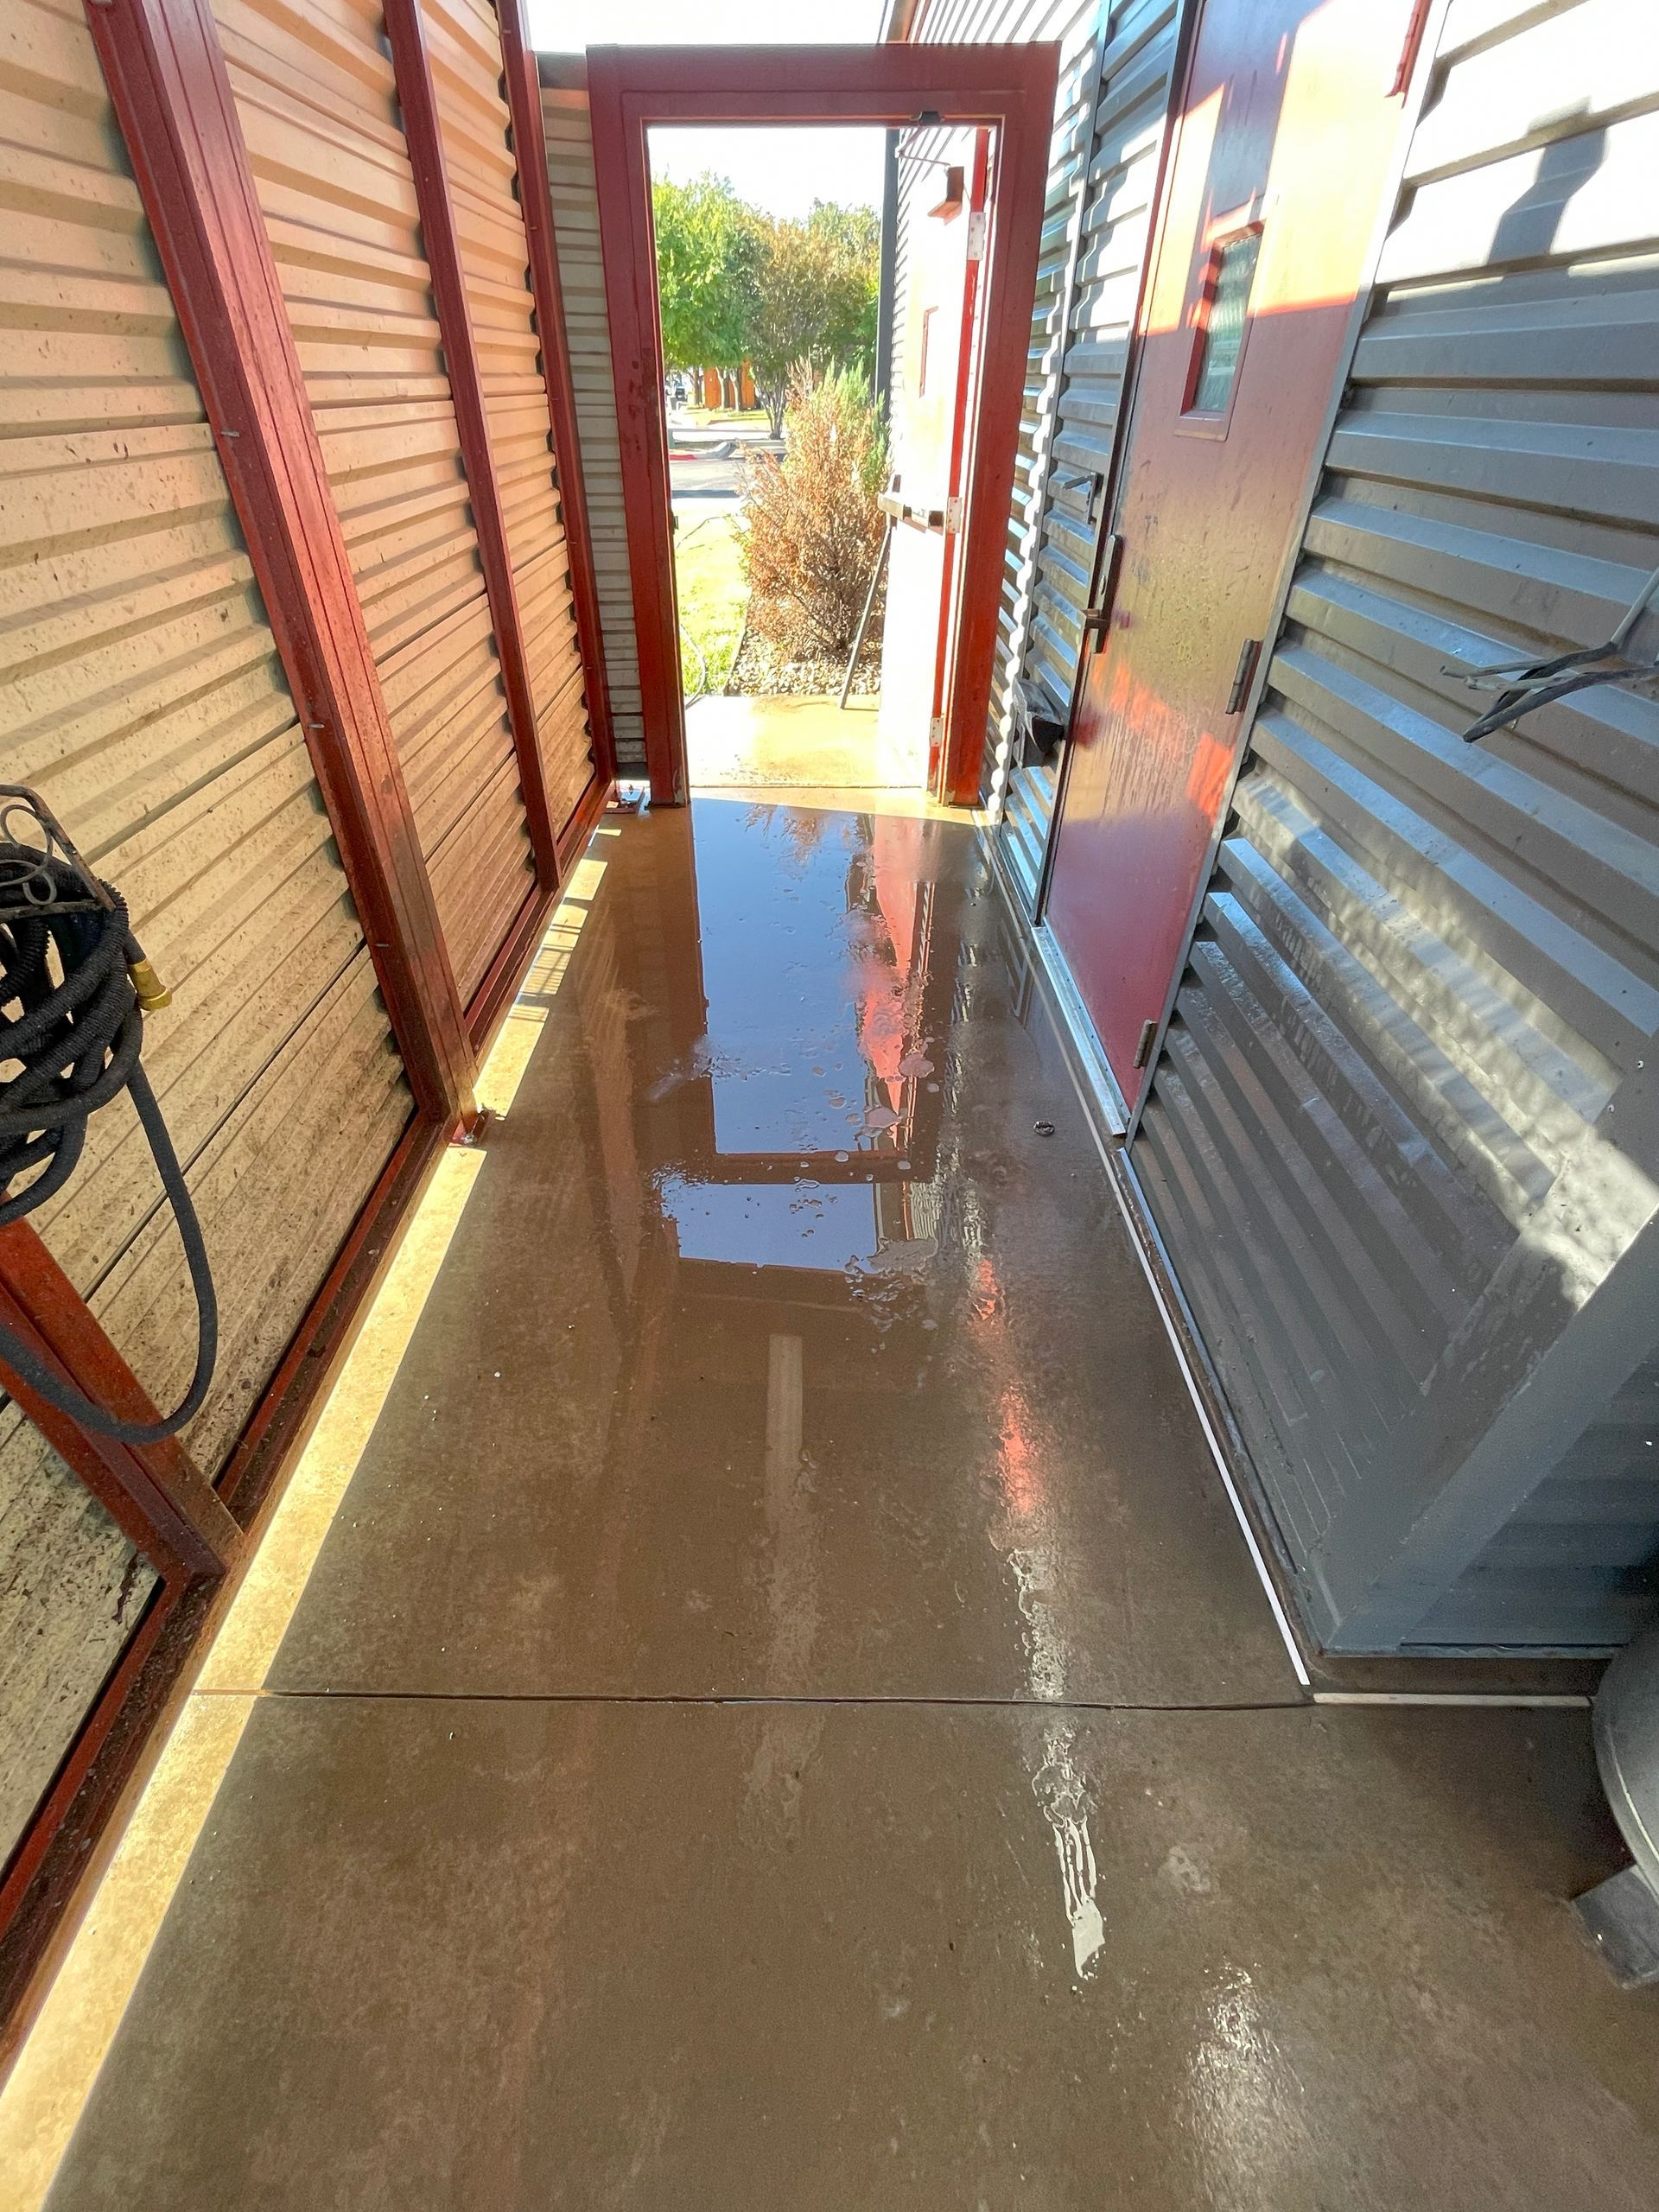 image of house concrete porch/garage after washing